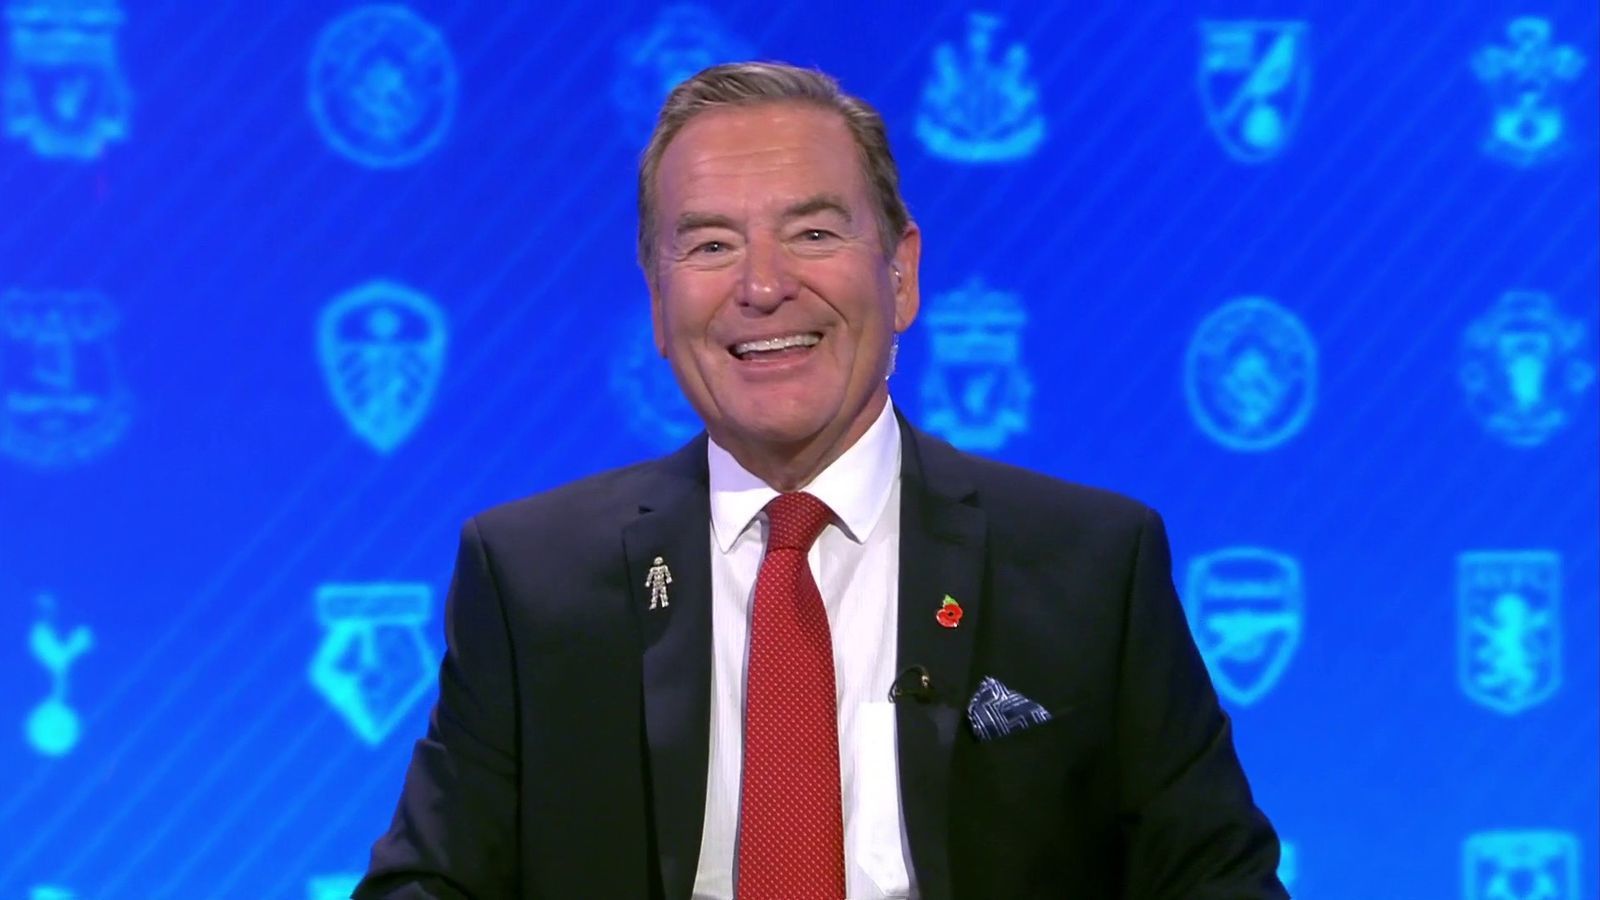 Sky Sports presenter Jeff Stelling, from Hartlepool, announces he is to lave the popular Soccer Saturday show at the end of the season